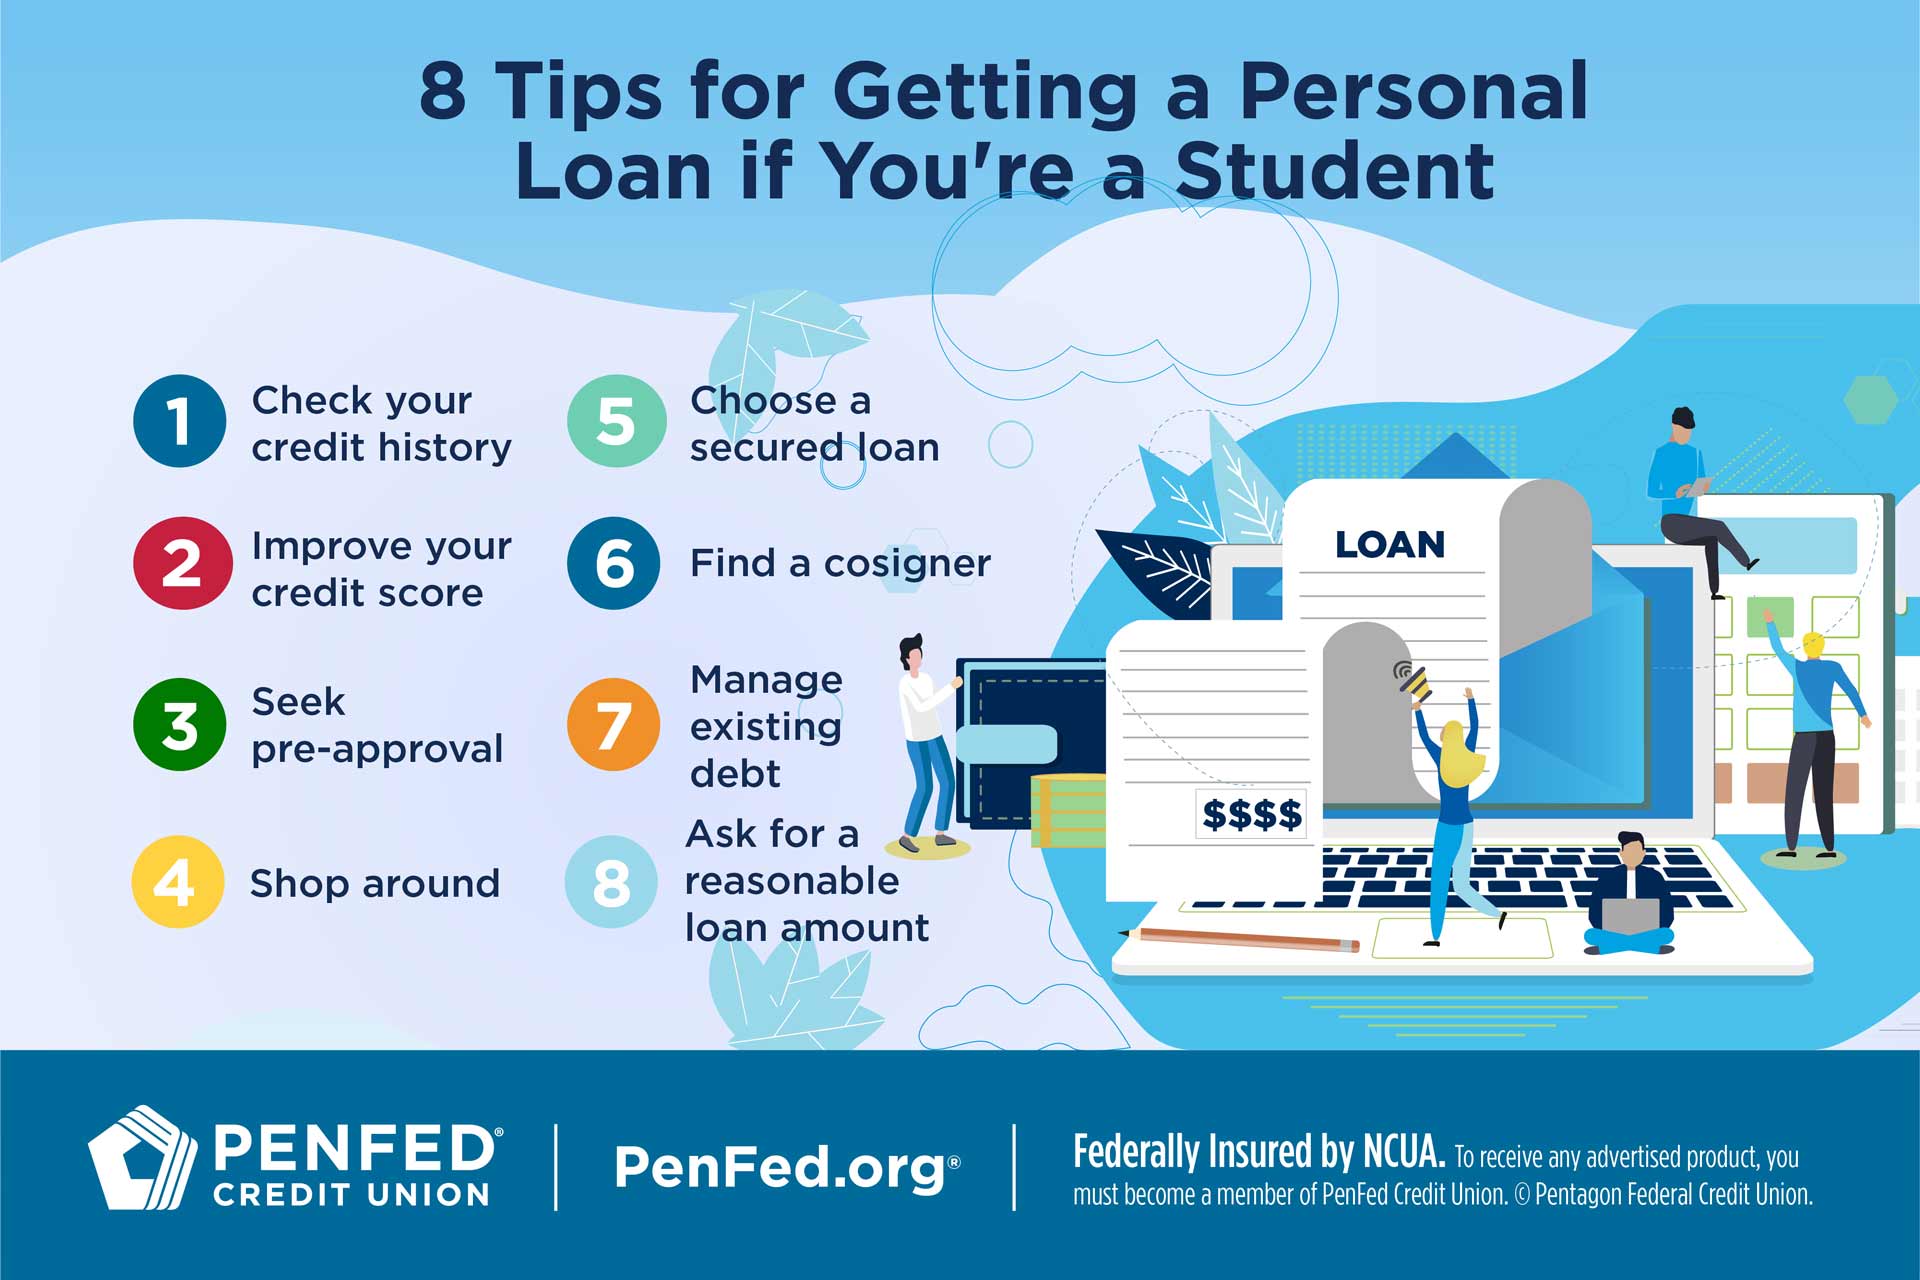 Information graphic for 8 tips for getting a personal loan